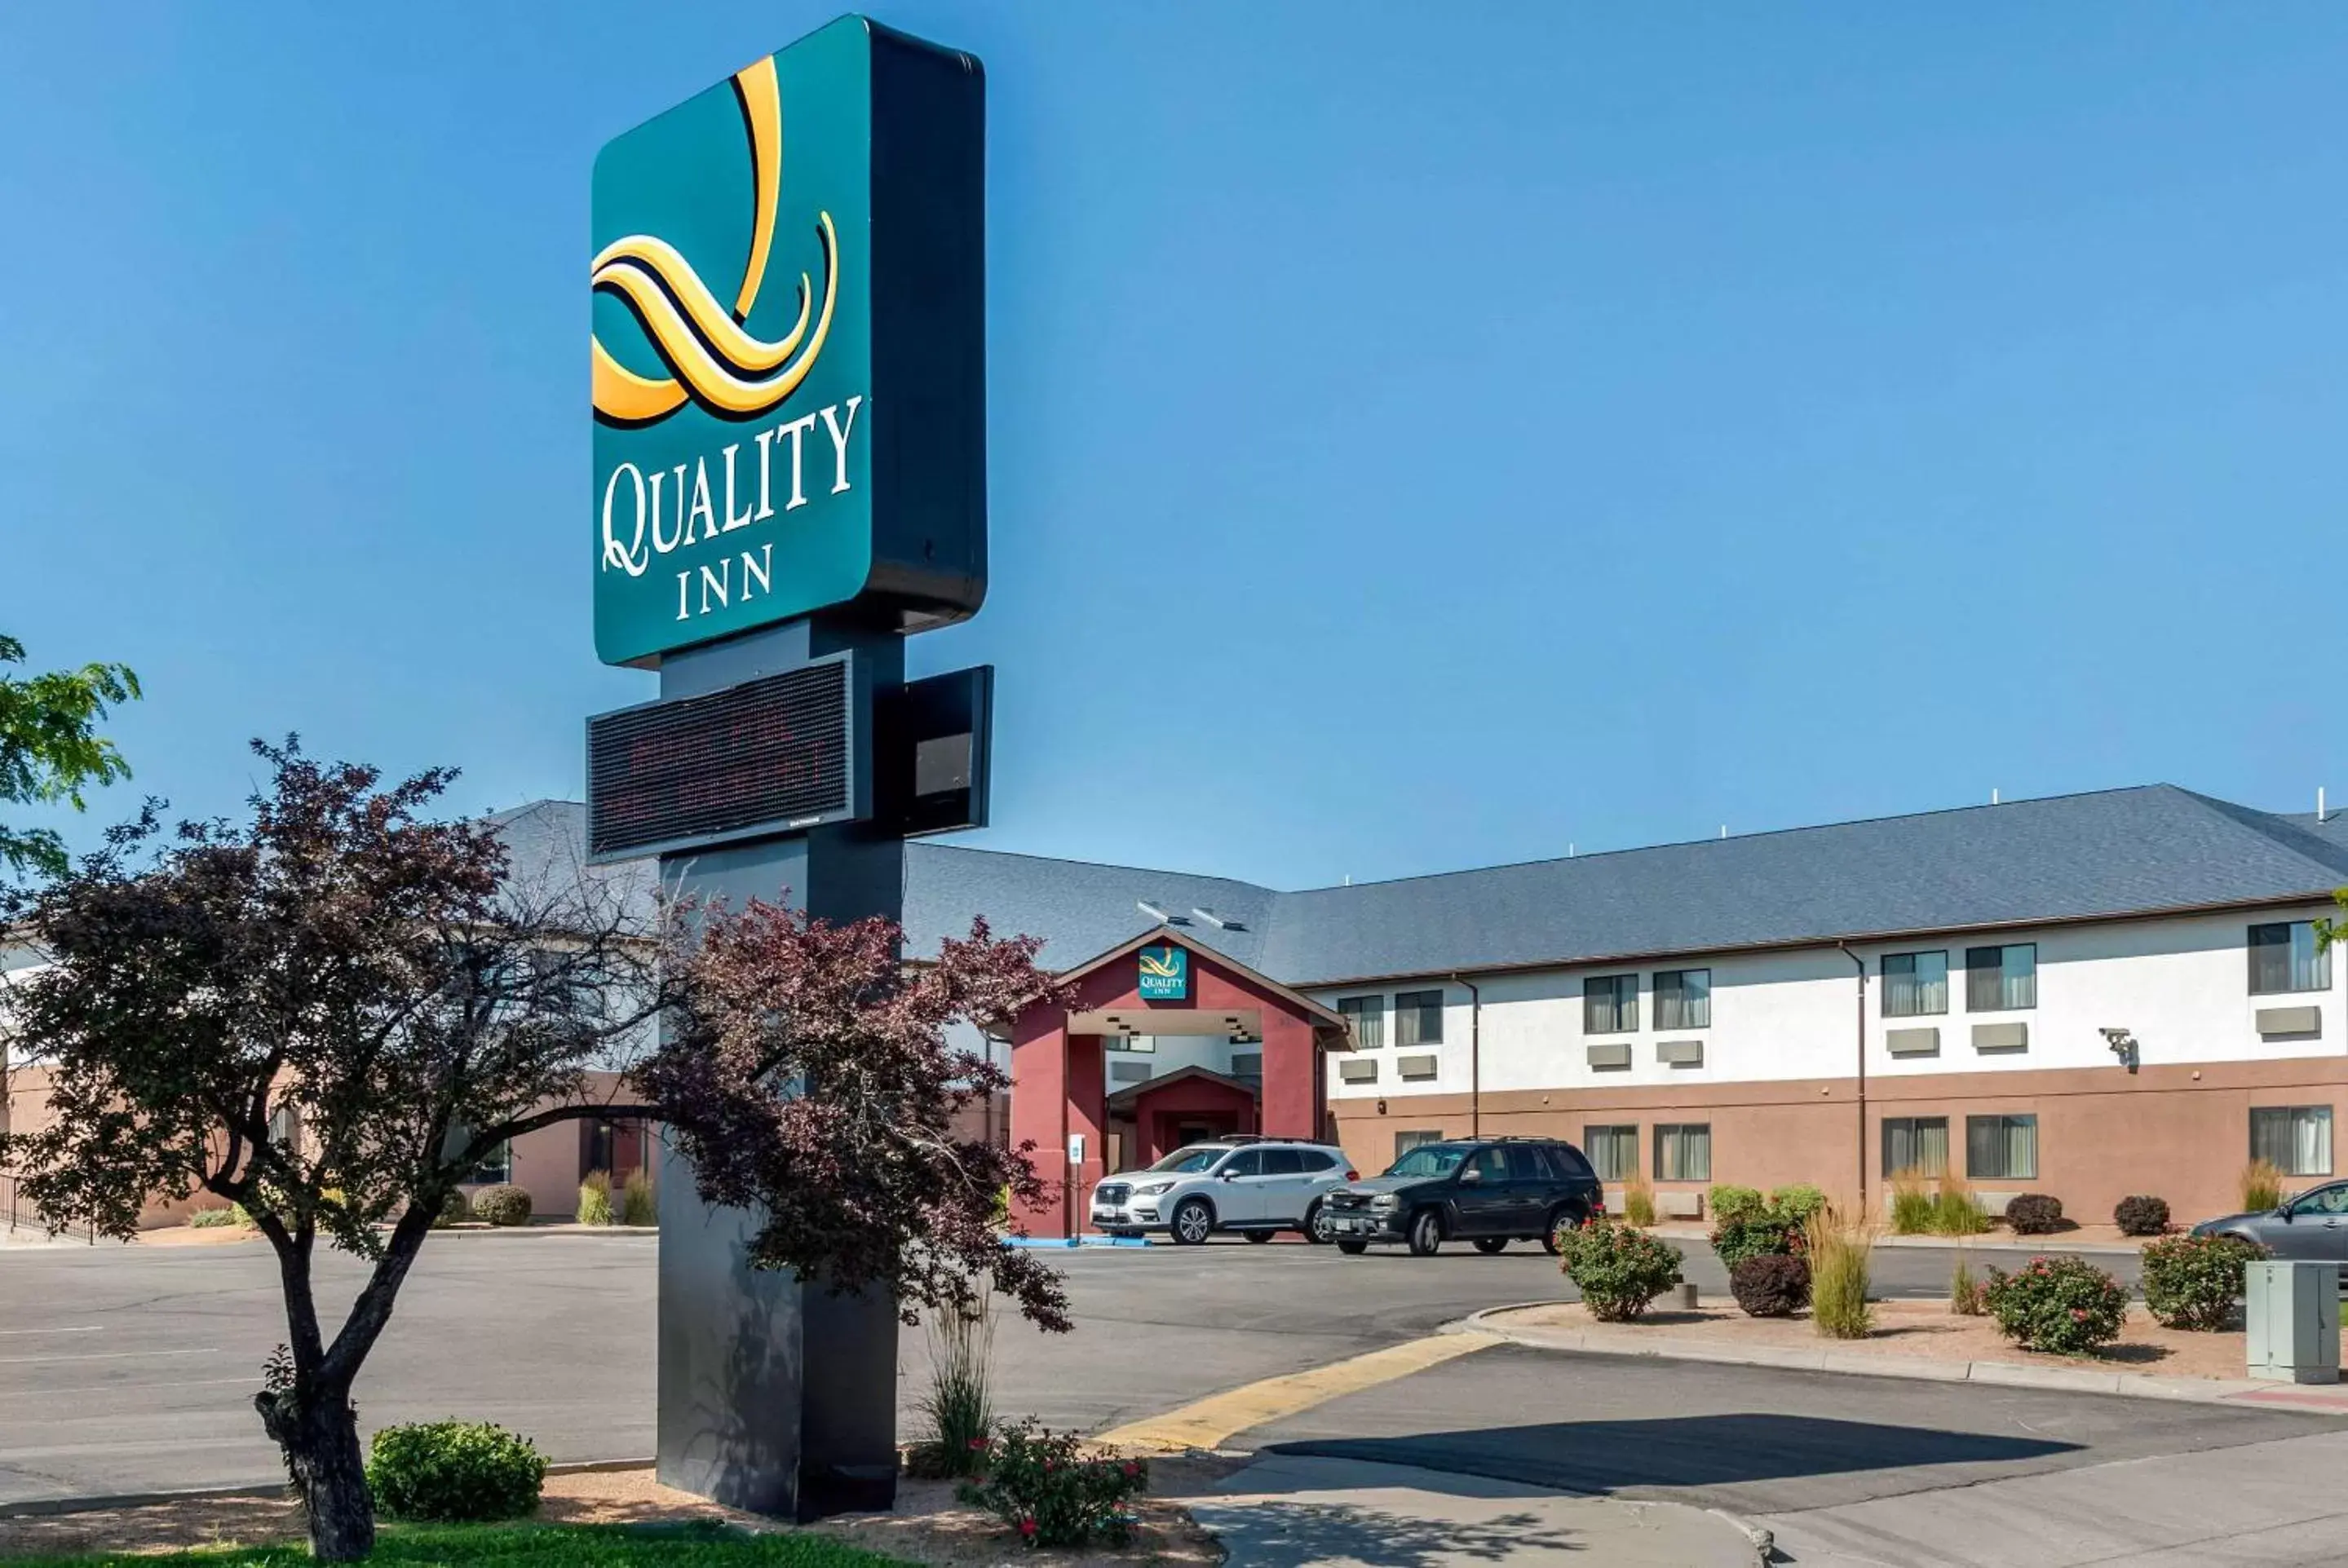 Property Building in Quality Inn I-25